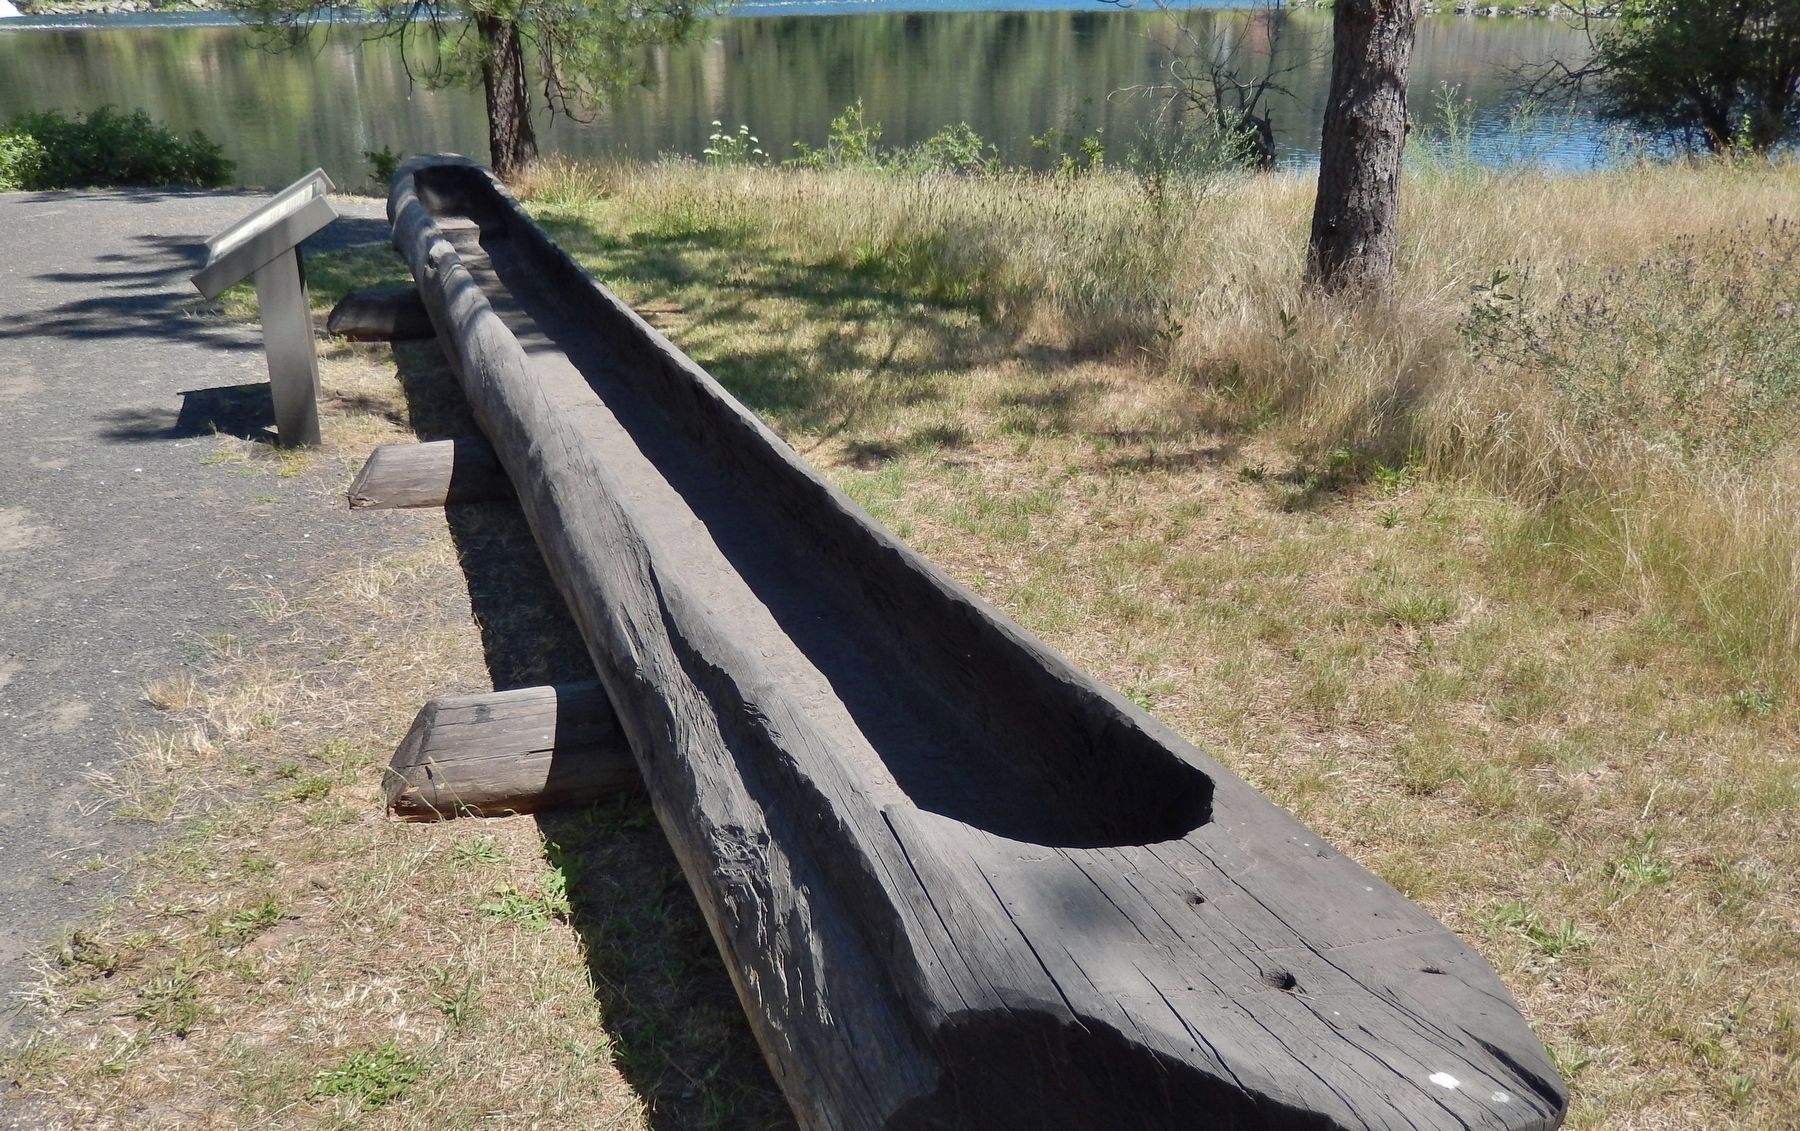 Dugout canoe detail image. Click for full size.